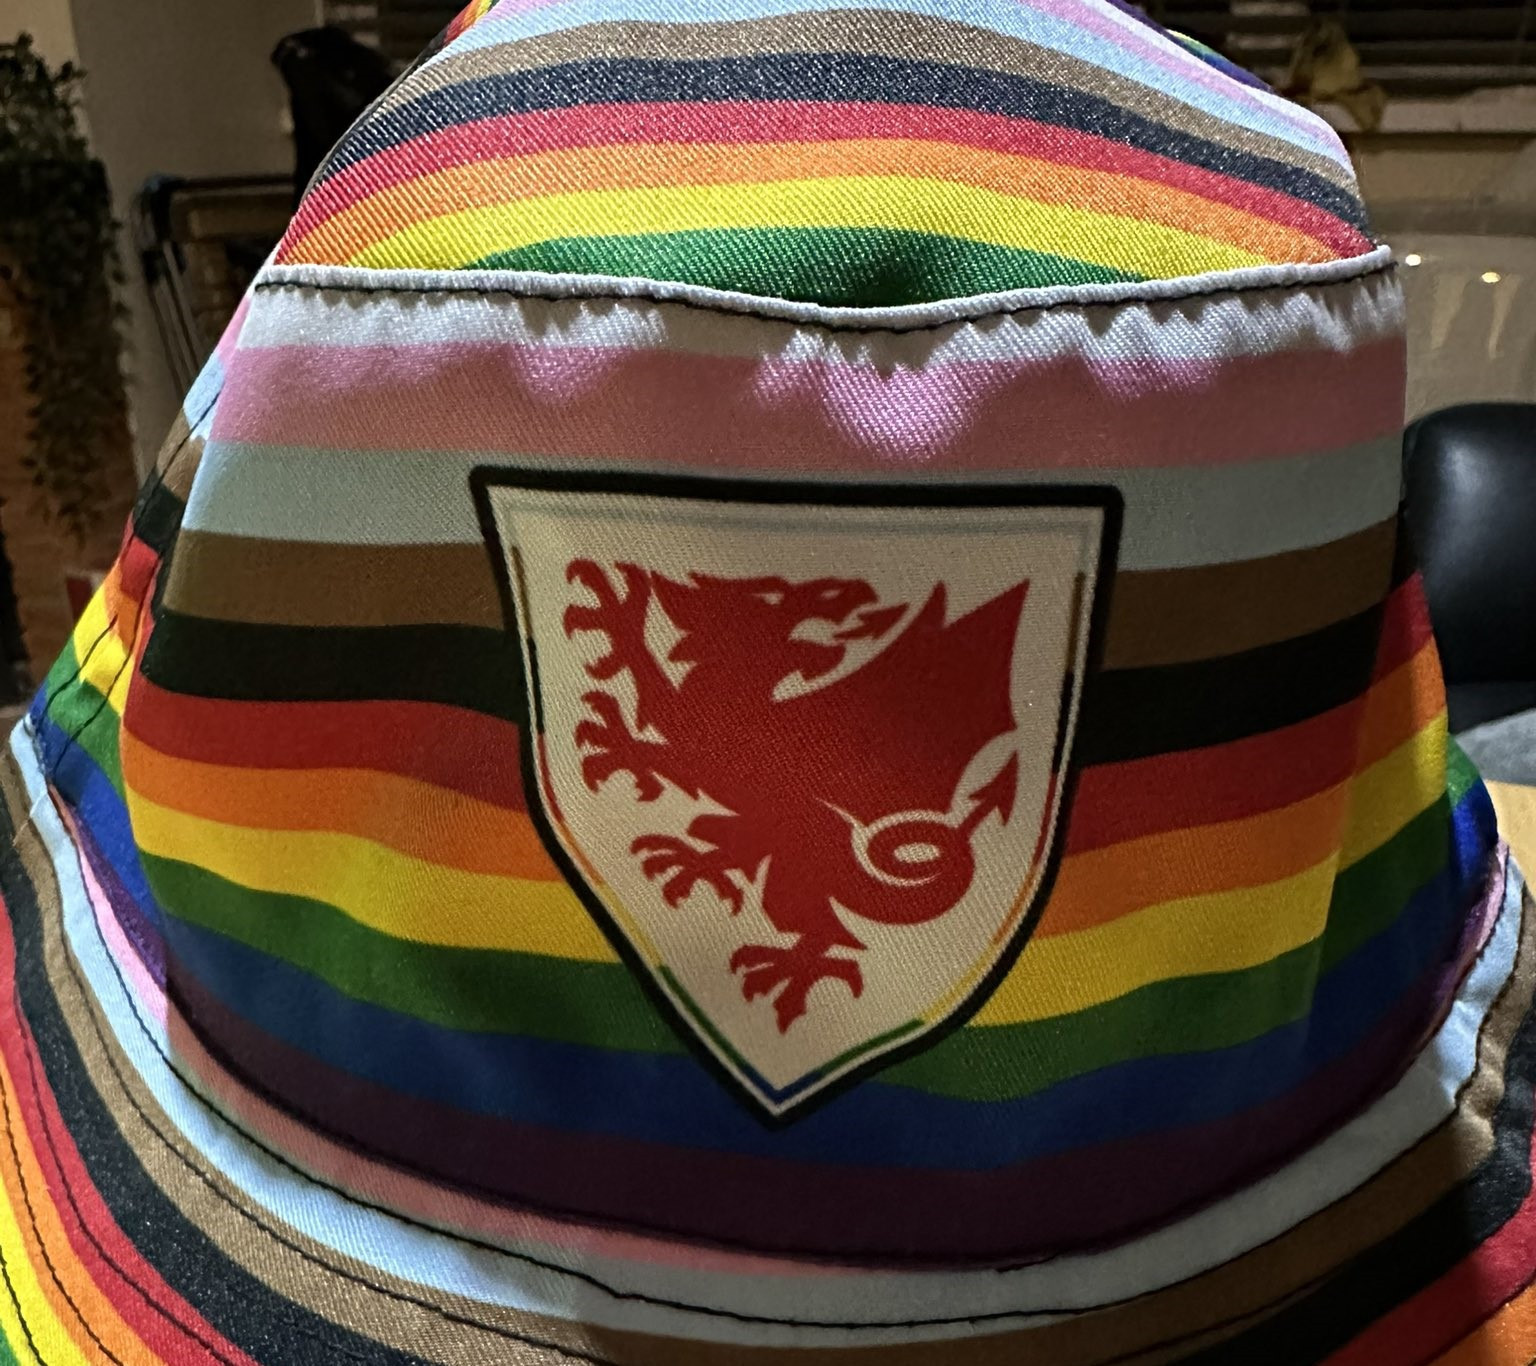 Welsh FA slam FIFA over confiscation of fans' rainbow hats at World Cup